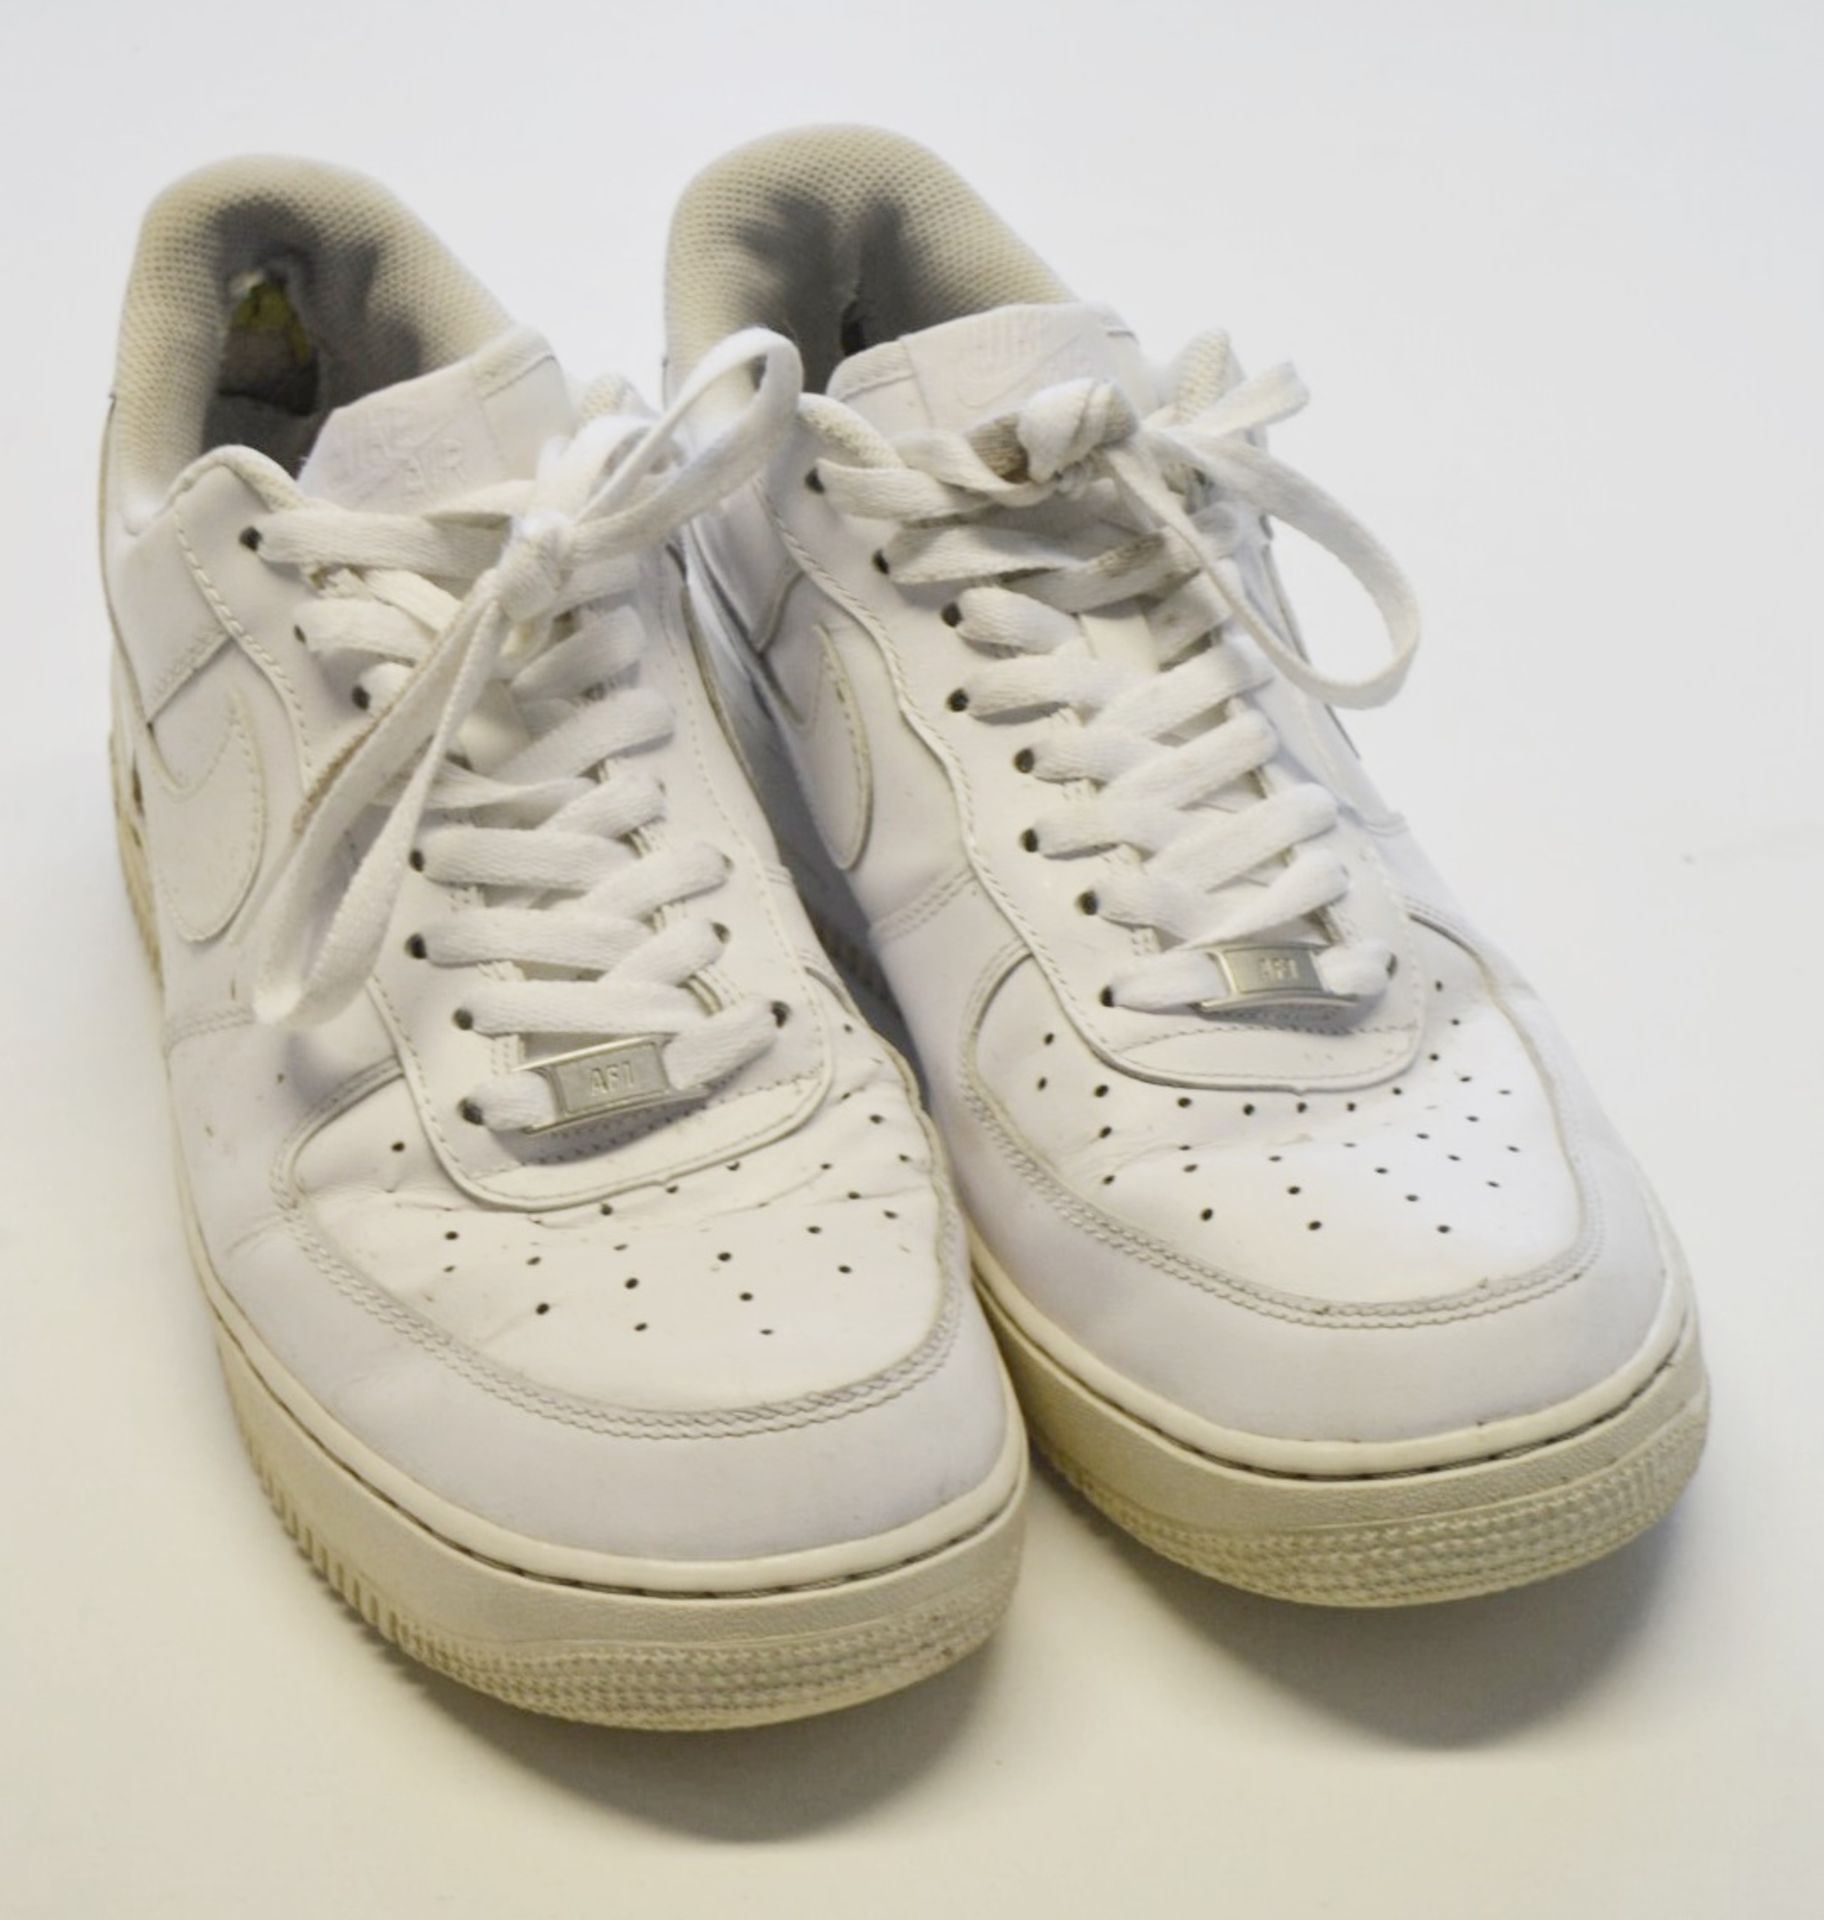 1 x Pair Of Men's Genuine Nike 'Air Force 1 Low' Trainers In White - Size (EU/UK): 44.5/9.5 -